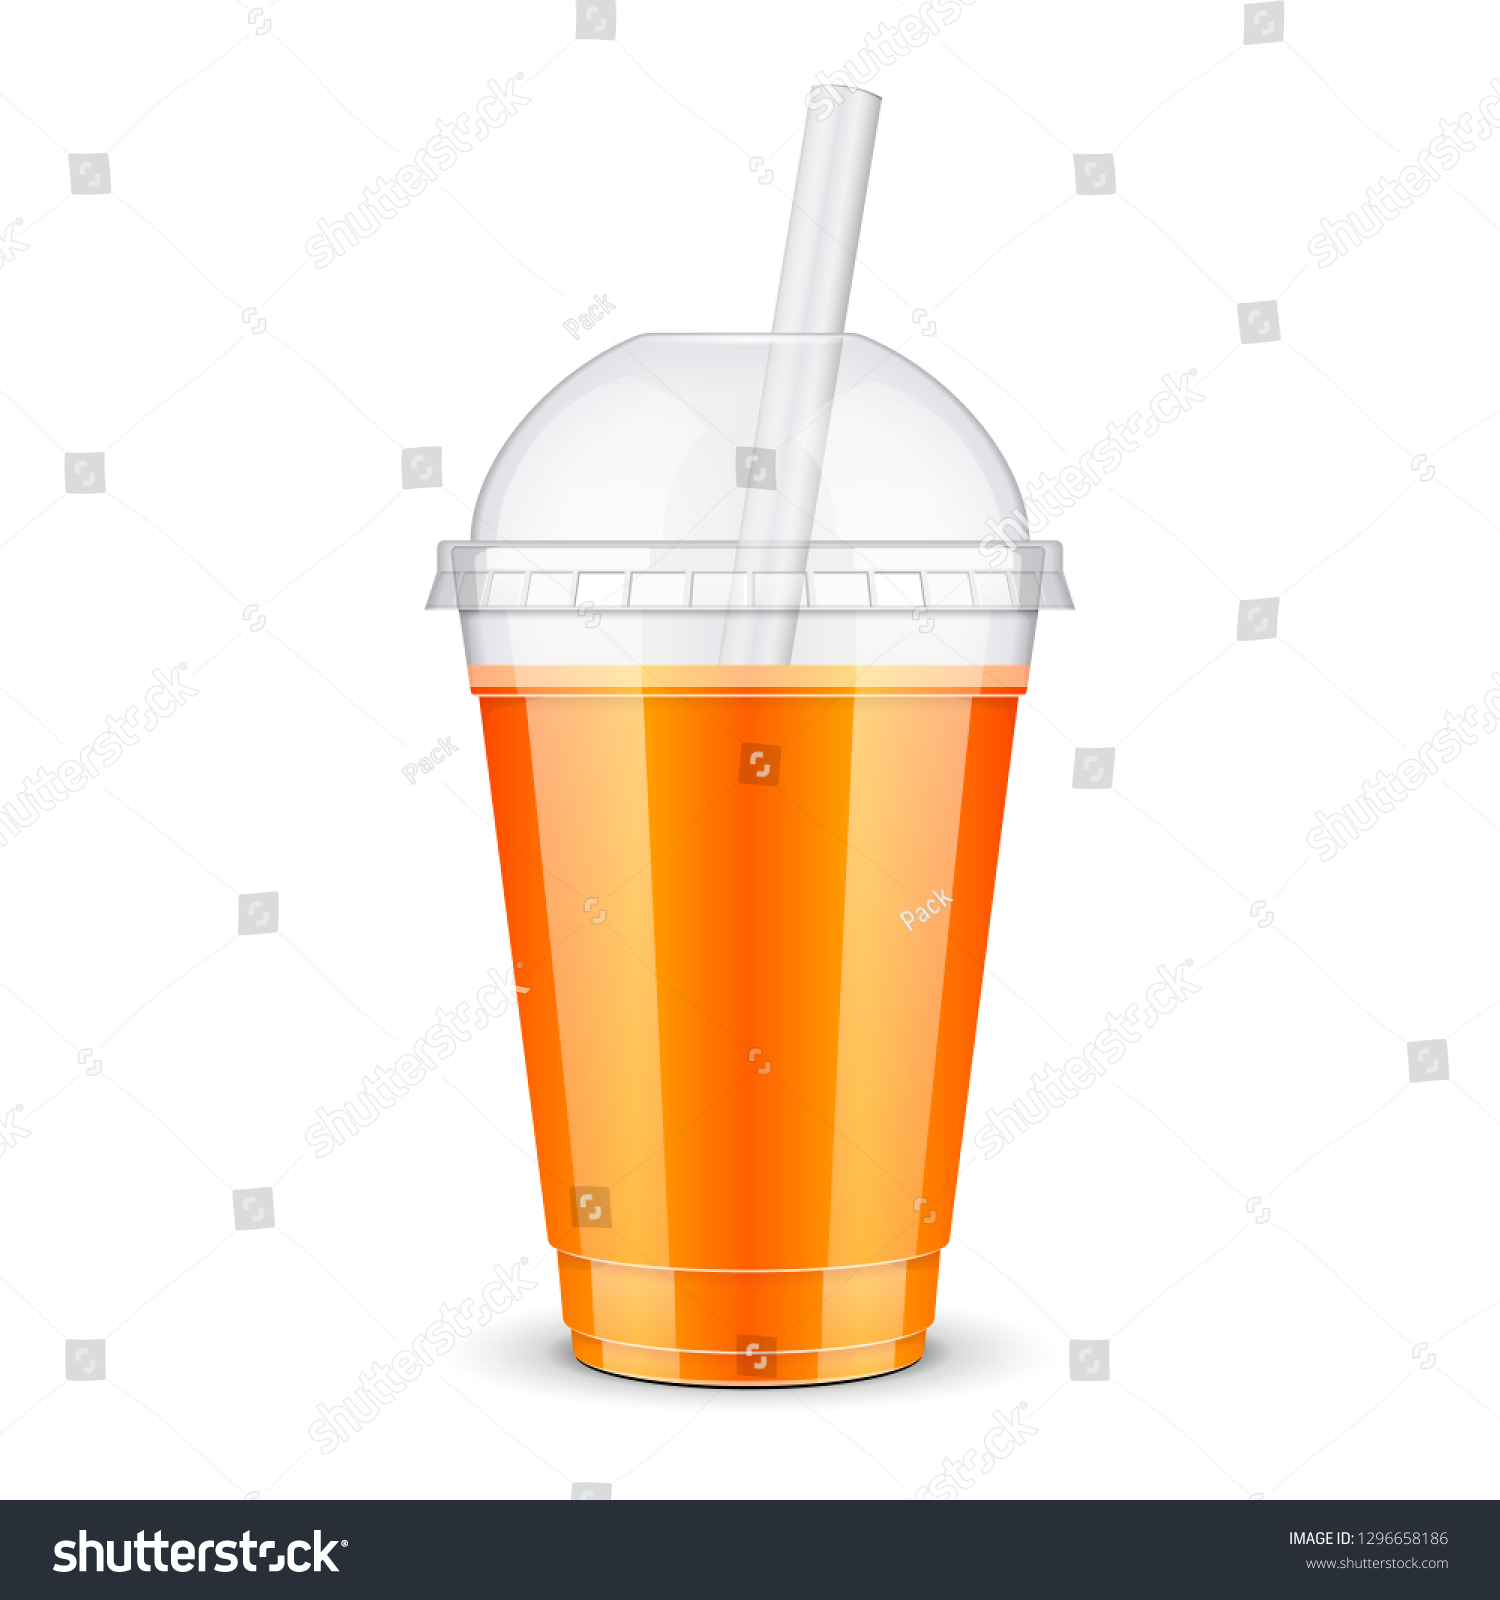 SVG of Mockup Filled Disposable Plastic Cup With Lid And Straw. Orange, Apricot, Mango, Melon, Fresh Drink. Yellow, Orange Juice. Transparent. Illustration Isolated On White Background Mock Up Template  svg